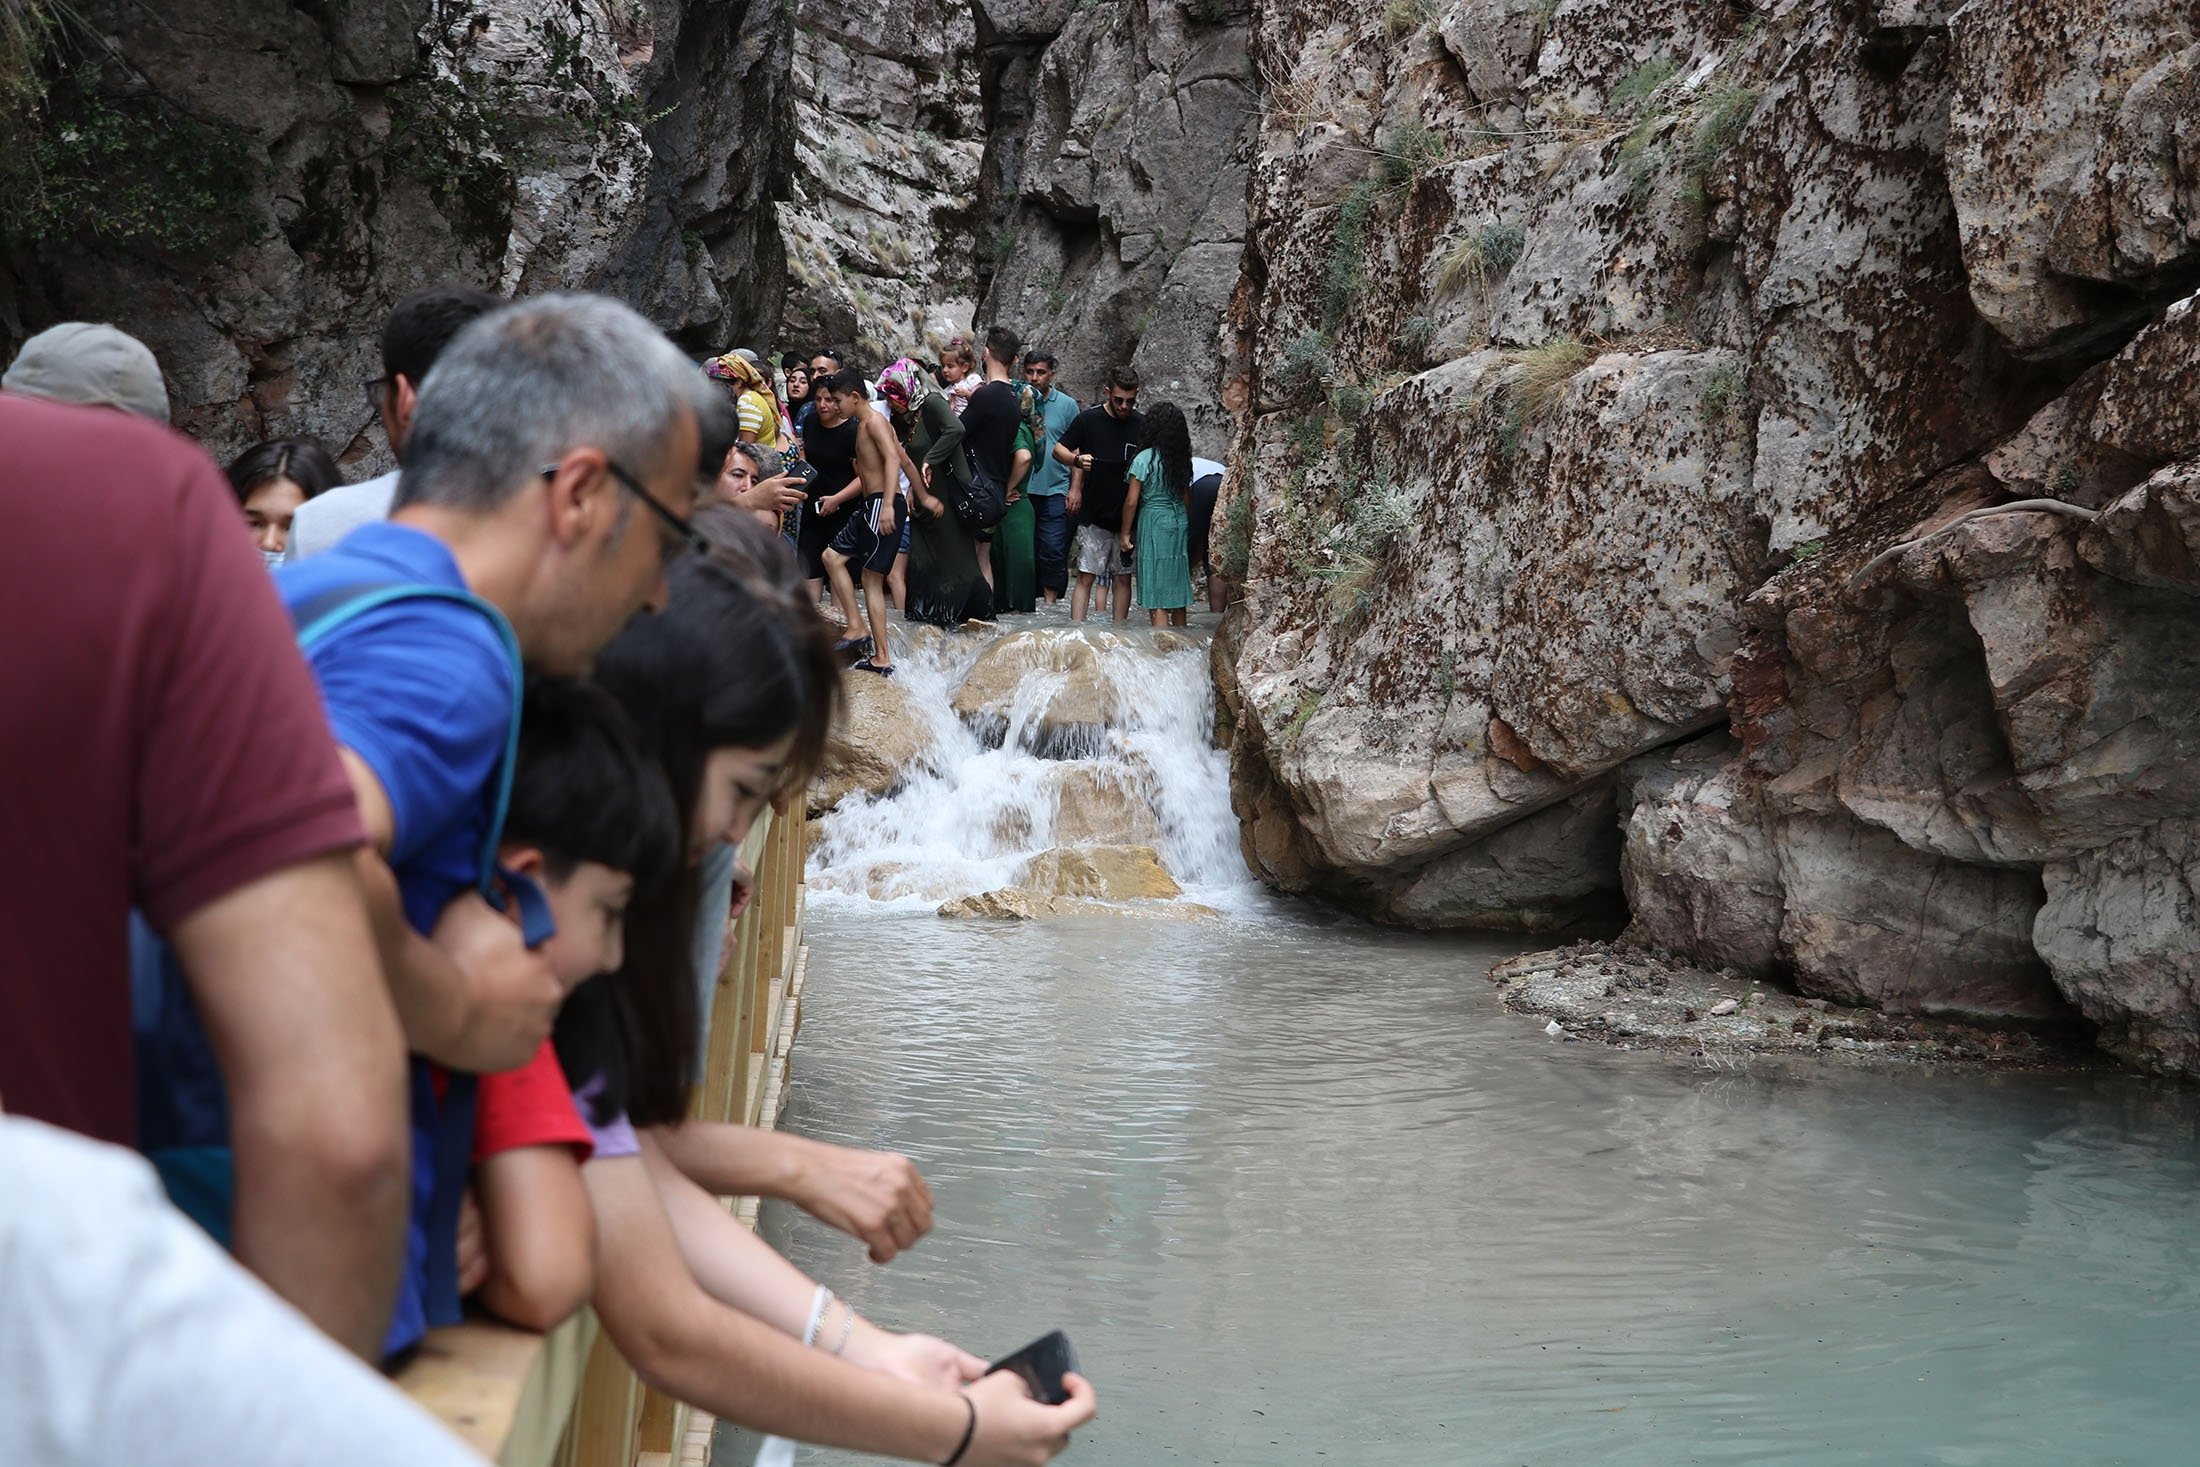 People walk along a wooden platform and watch the water flow at the Acıpayam Canyon, Denizli, Turkey, July 25, 2021. (AA Photo)